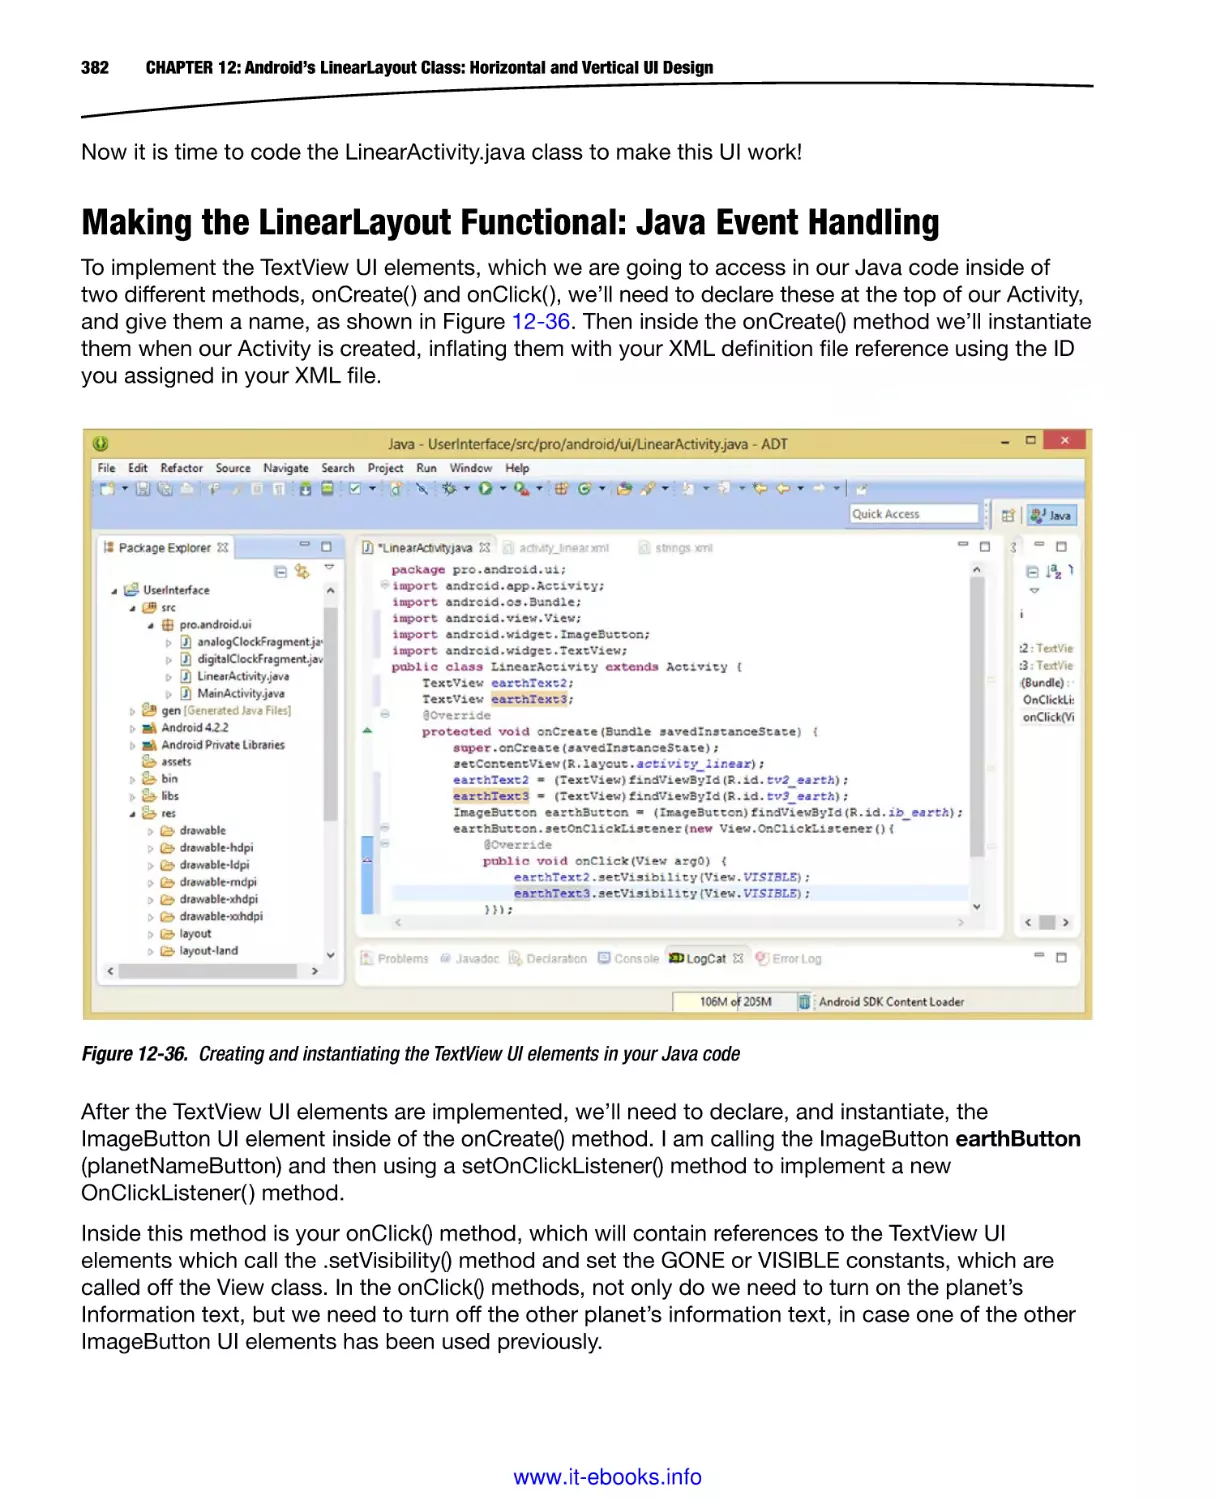 Making the LinearLayout Functional